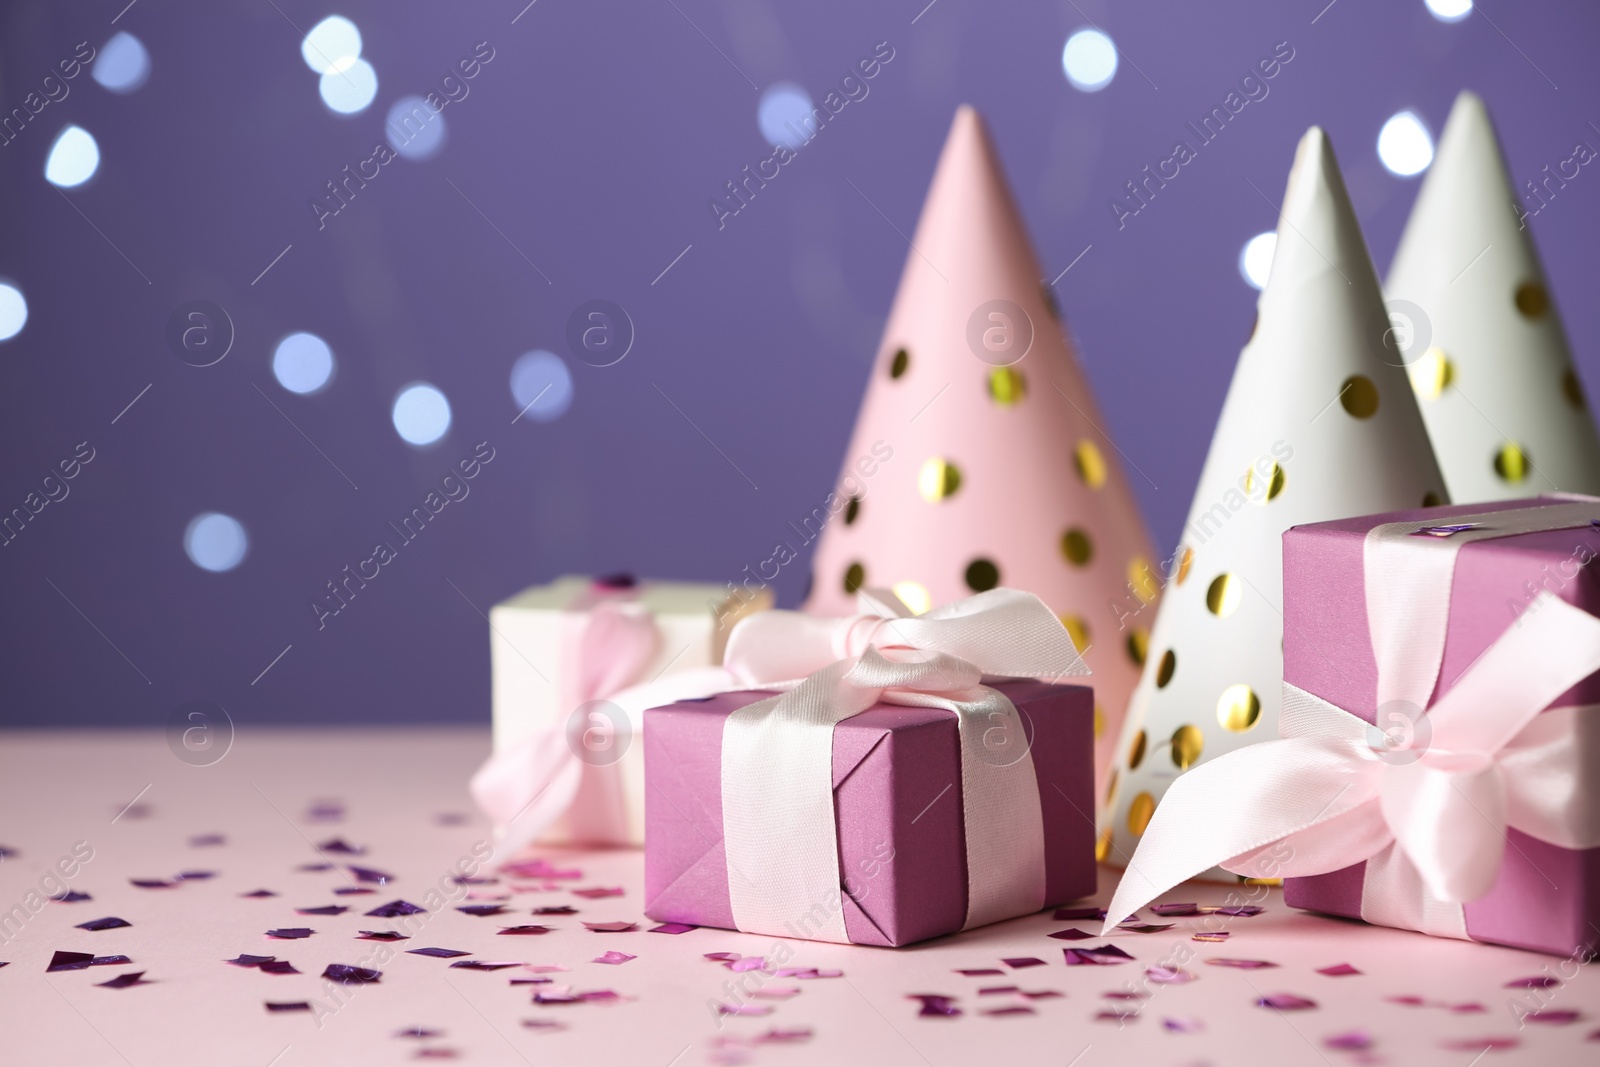 Photo of Gift boxes and party hats on pink table against blurred lights. Space for text